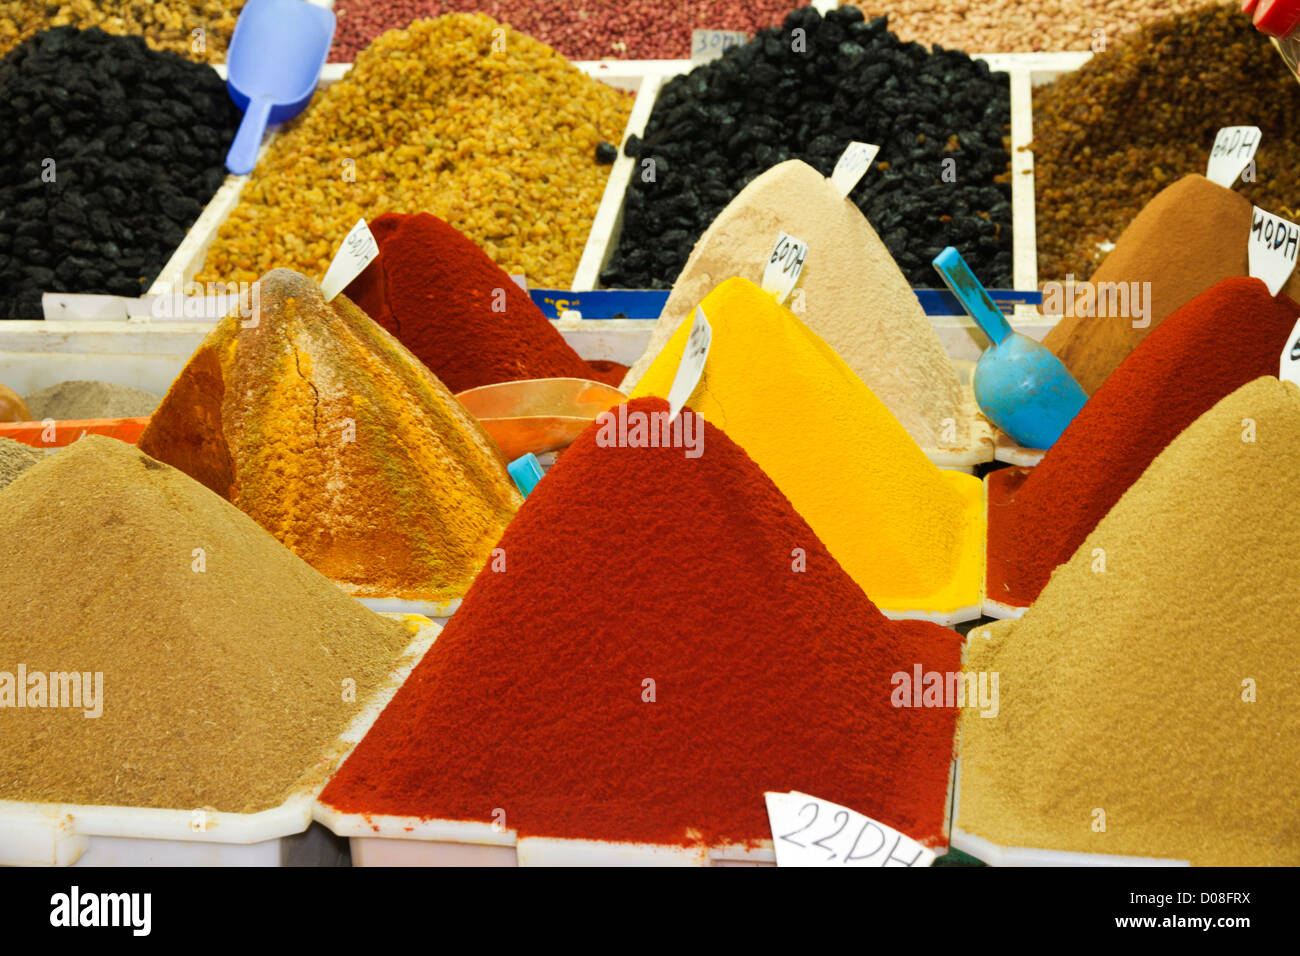 Piles of Freshly ground Spices, for sale Morocco. Stock Photo